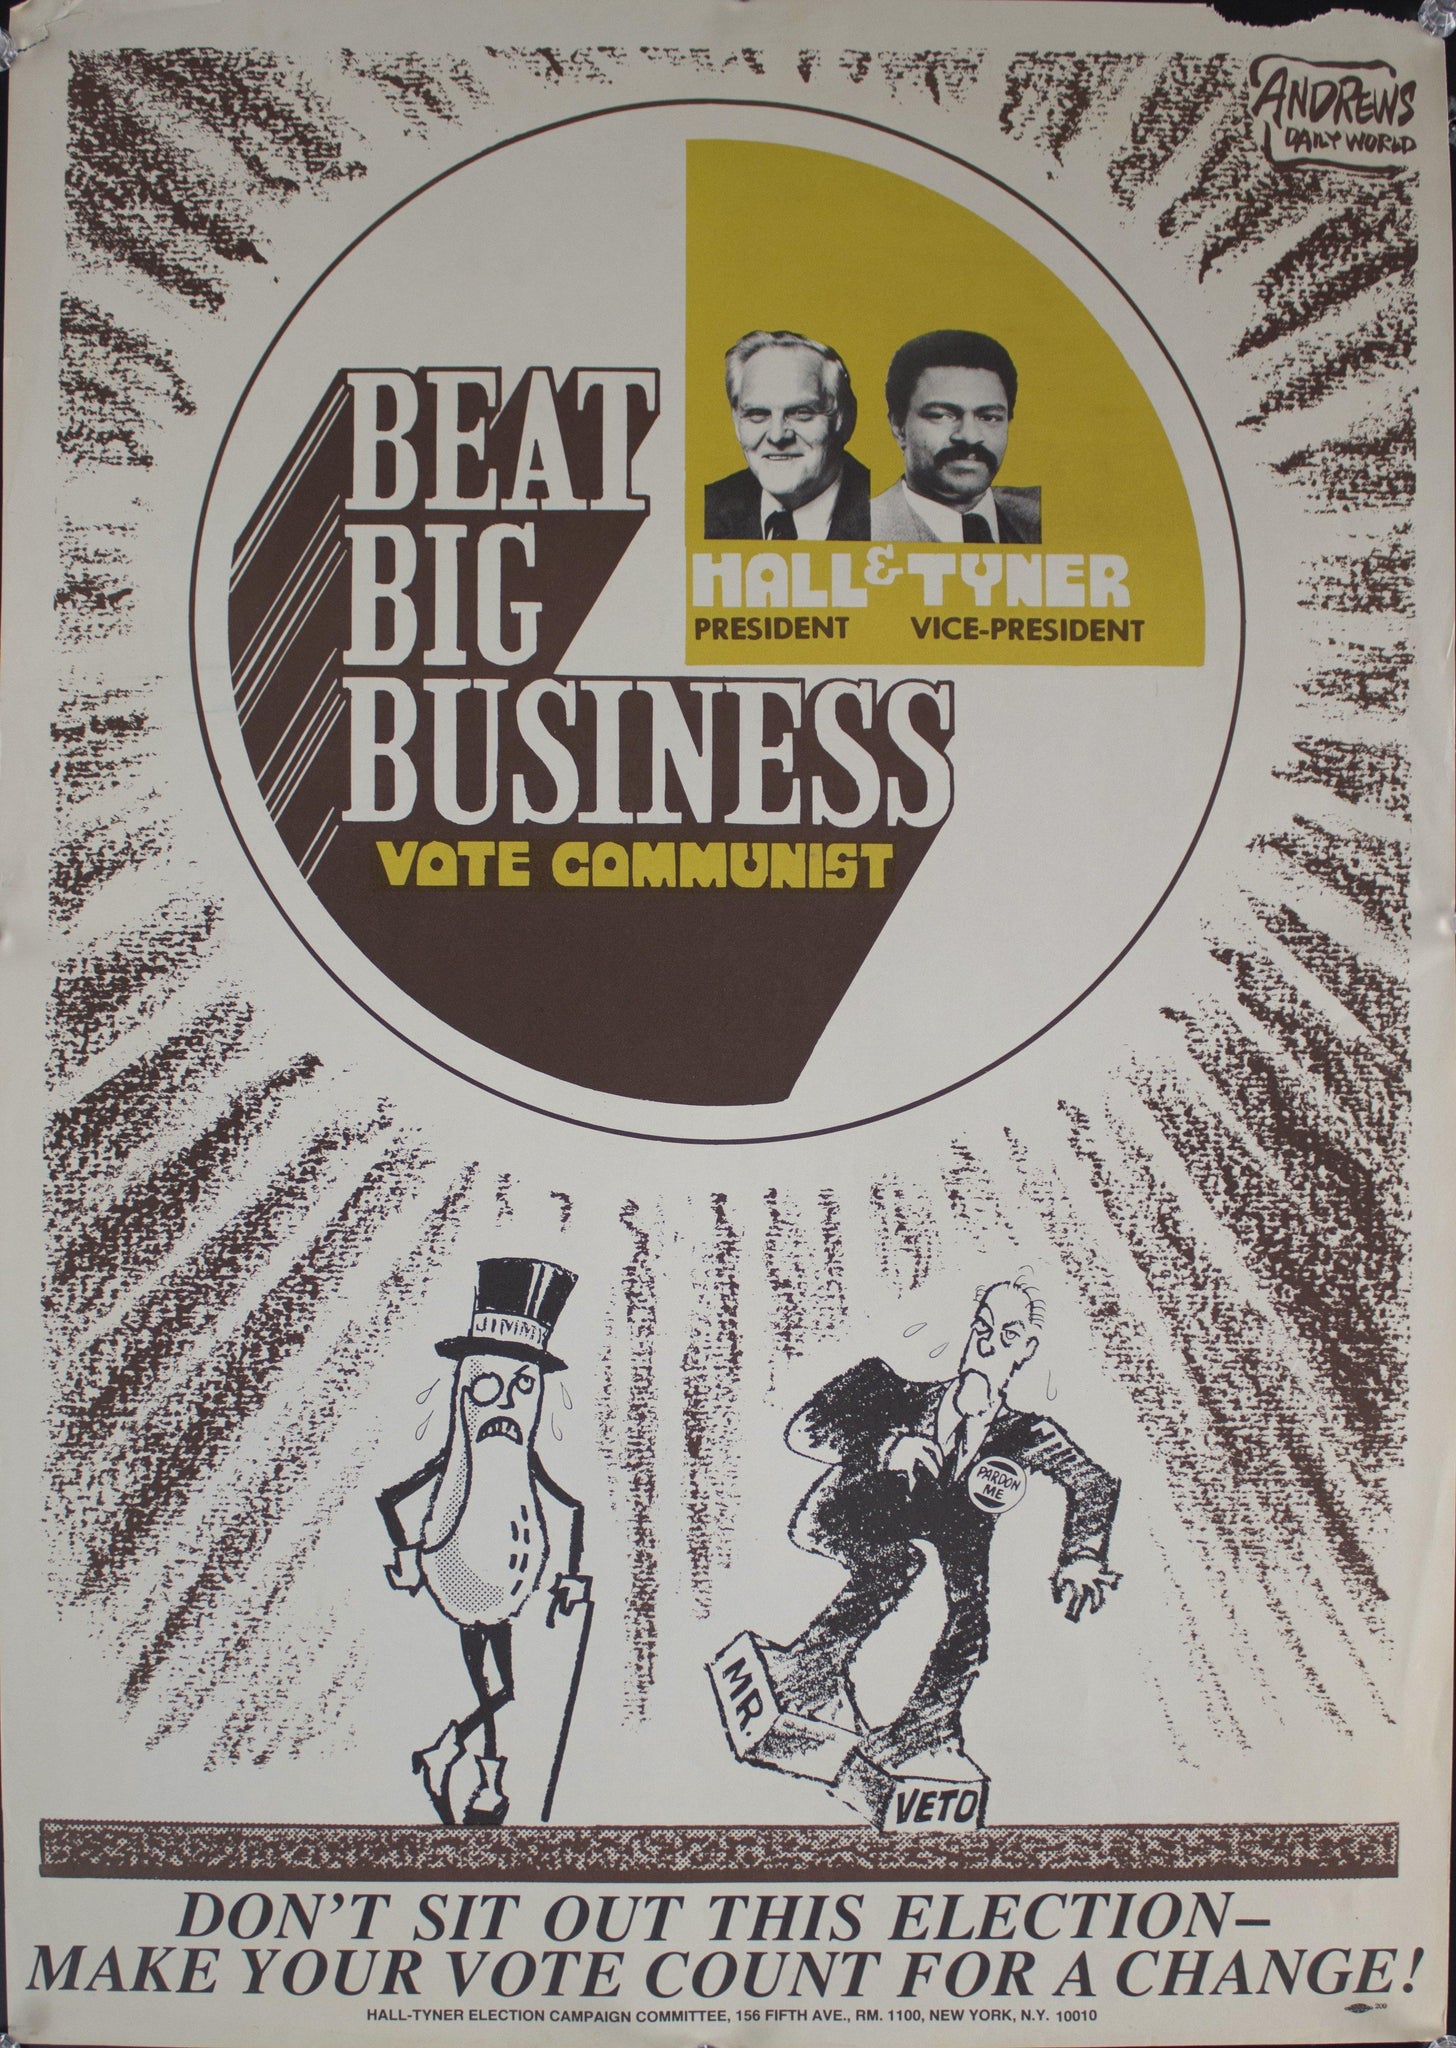 1976 Beat Big Business | Vote Communist | Hall & Tyner | Andrew's Daily World - Golden Age Posters